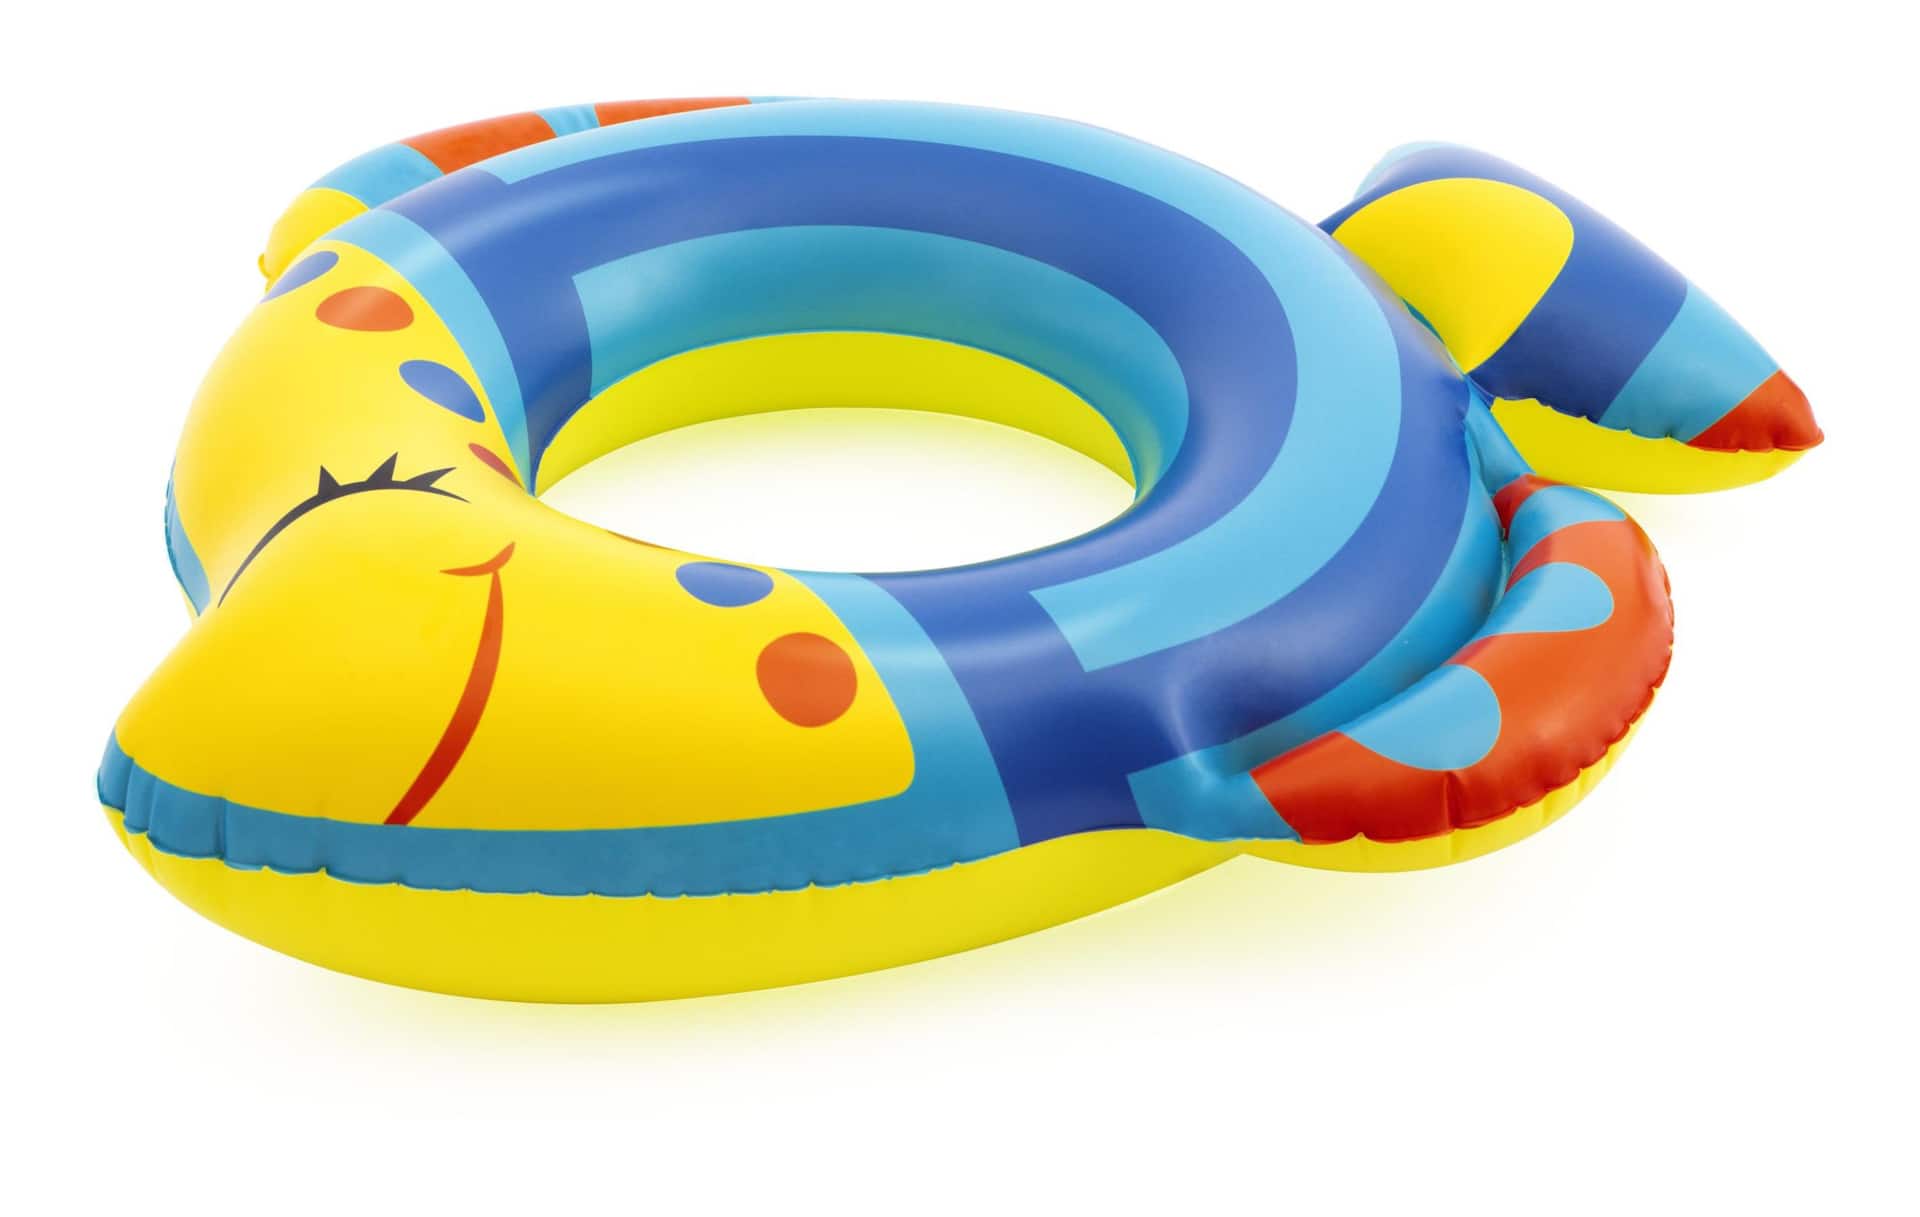 Toy Boat Bath Toys Toddler With 2 Mini Swimming Ring Toys And Fishing Toys,  Kids Canoe, Fishing Boat Bath Bath Bath Swimming Pool Beach Toys